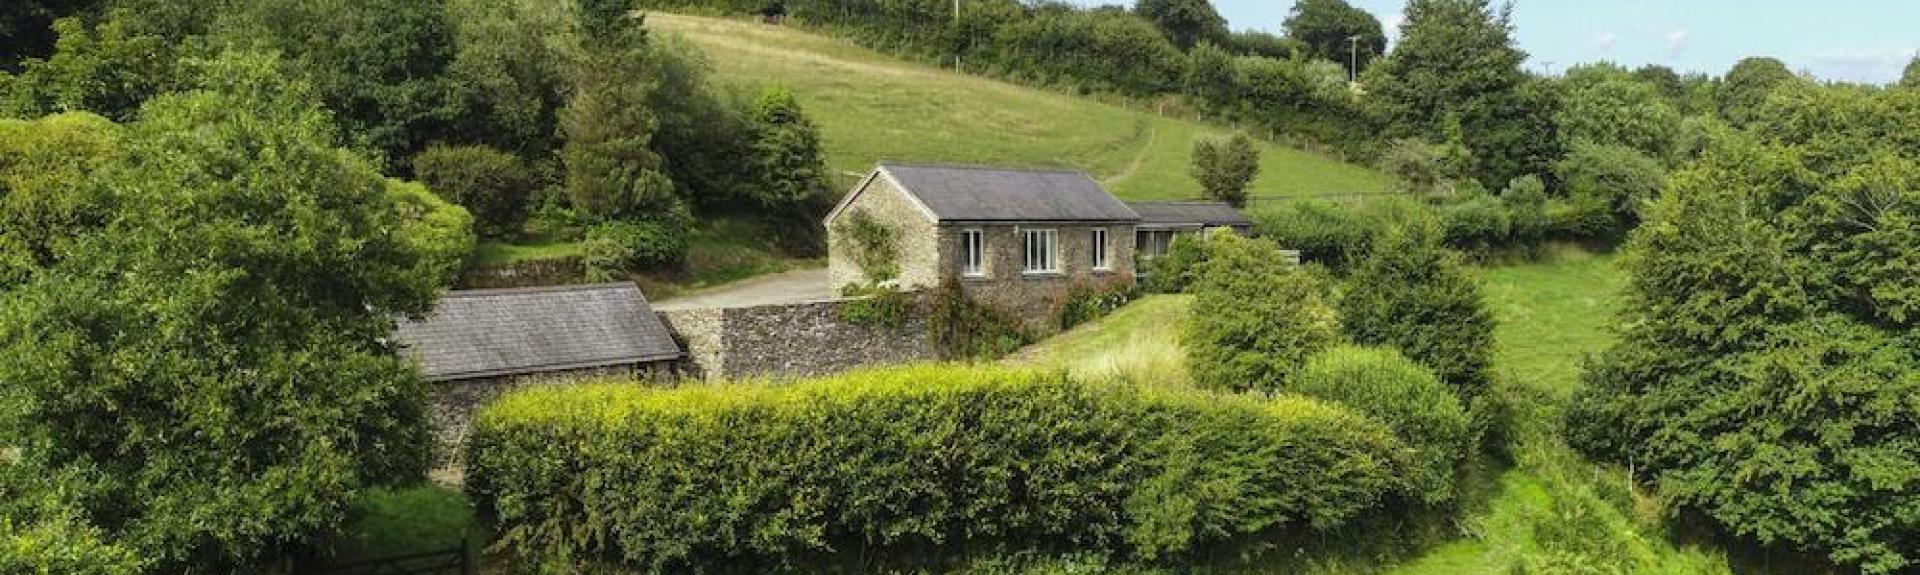 A log cabin nestles against a hillside surrounded by trees and bushes on Exmoor.